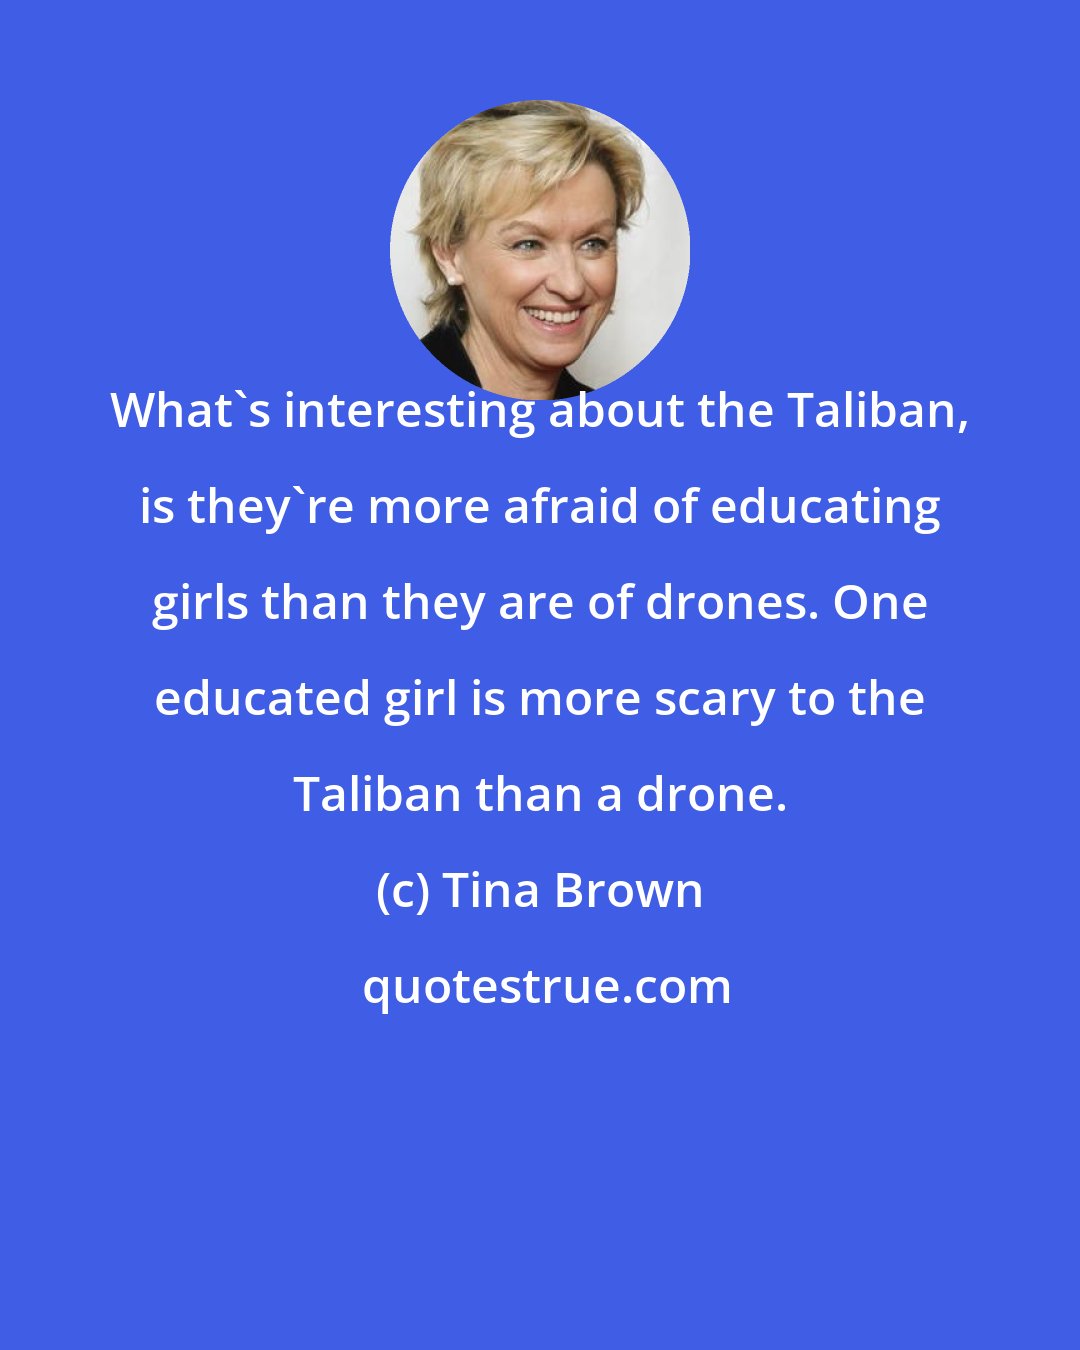 Tina Brown: What's interesting about the Taliban, is they're more afraid of educating girls than they are of drones. One educated girl is more scary to the Taliban than a drone.